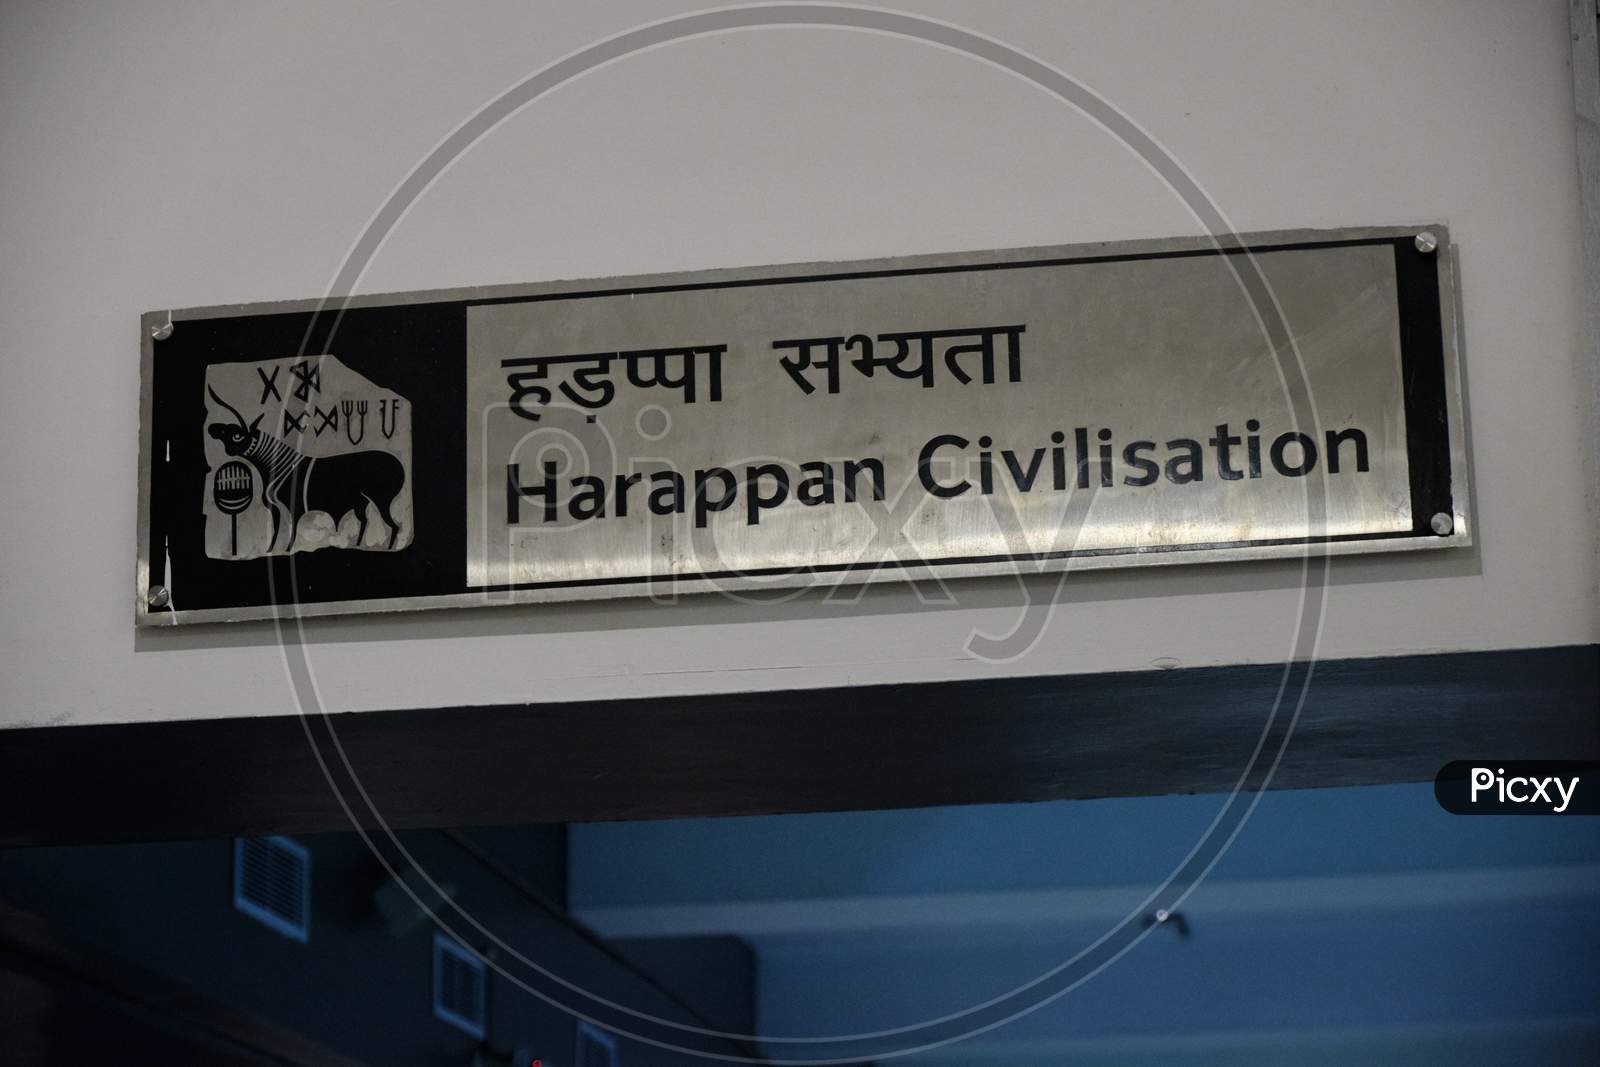 Harappan Civilization Hall In The National Museum Of India In New Delhi